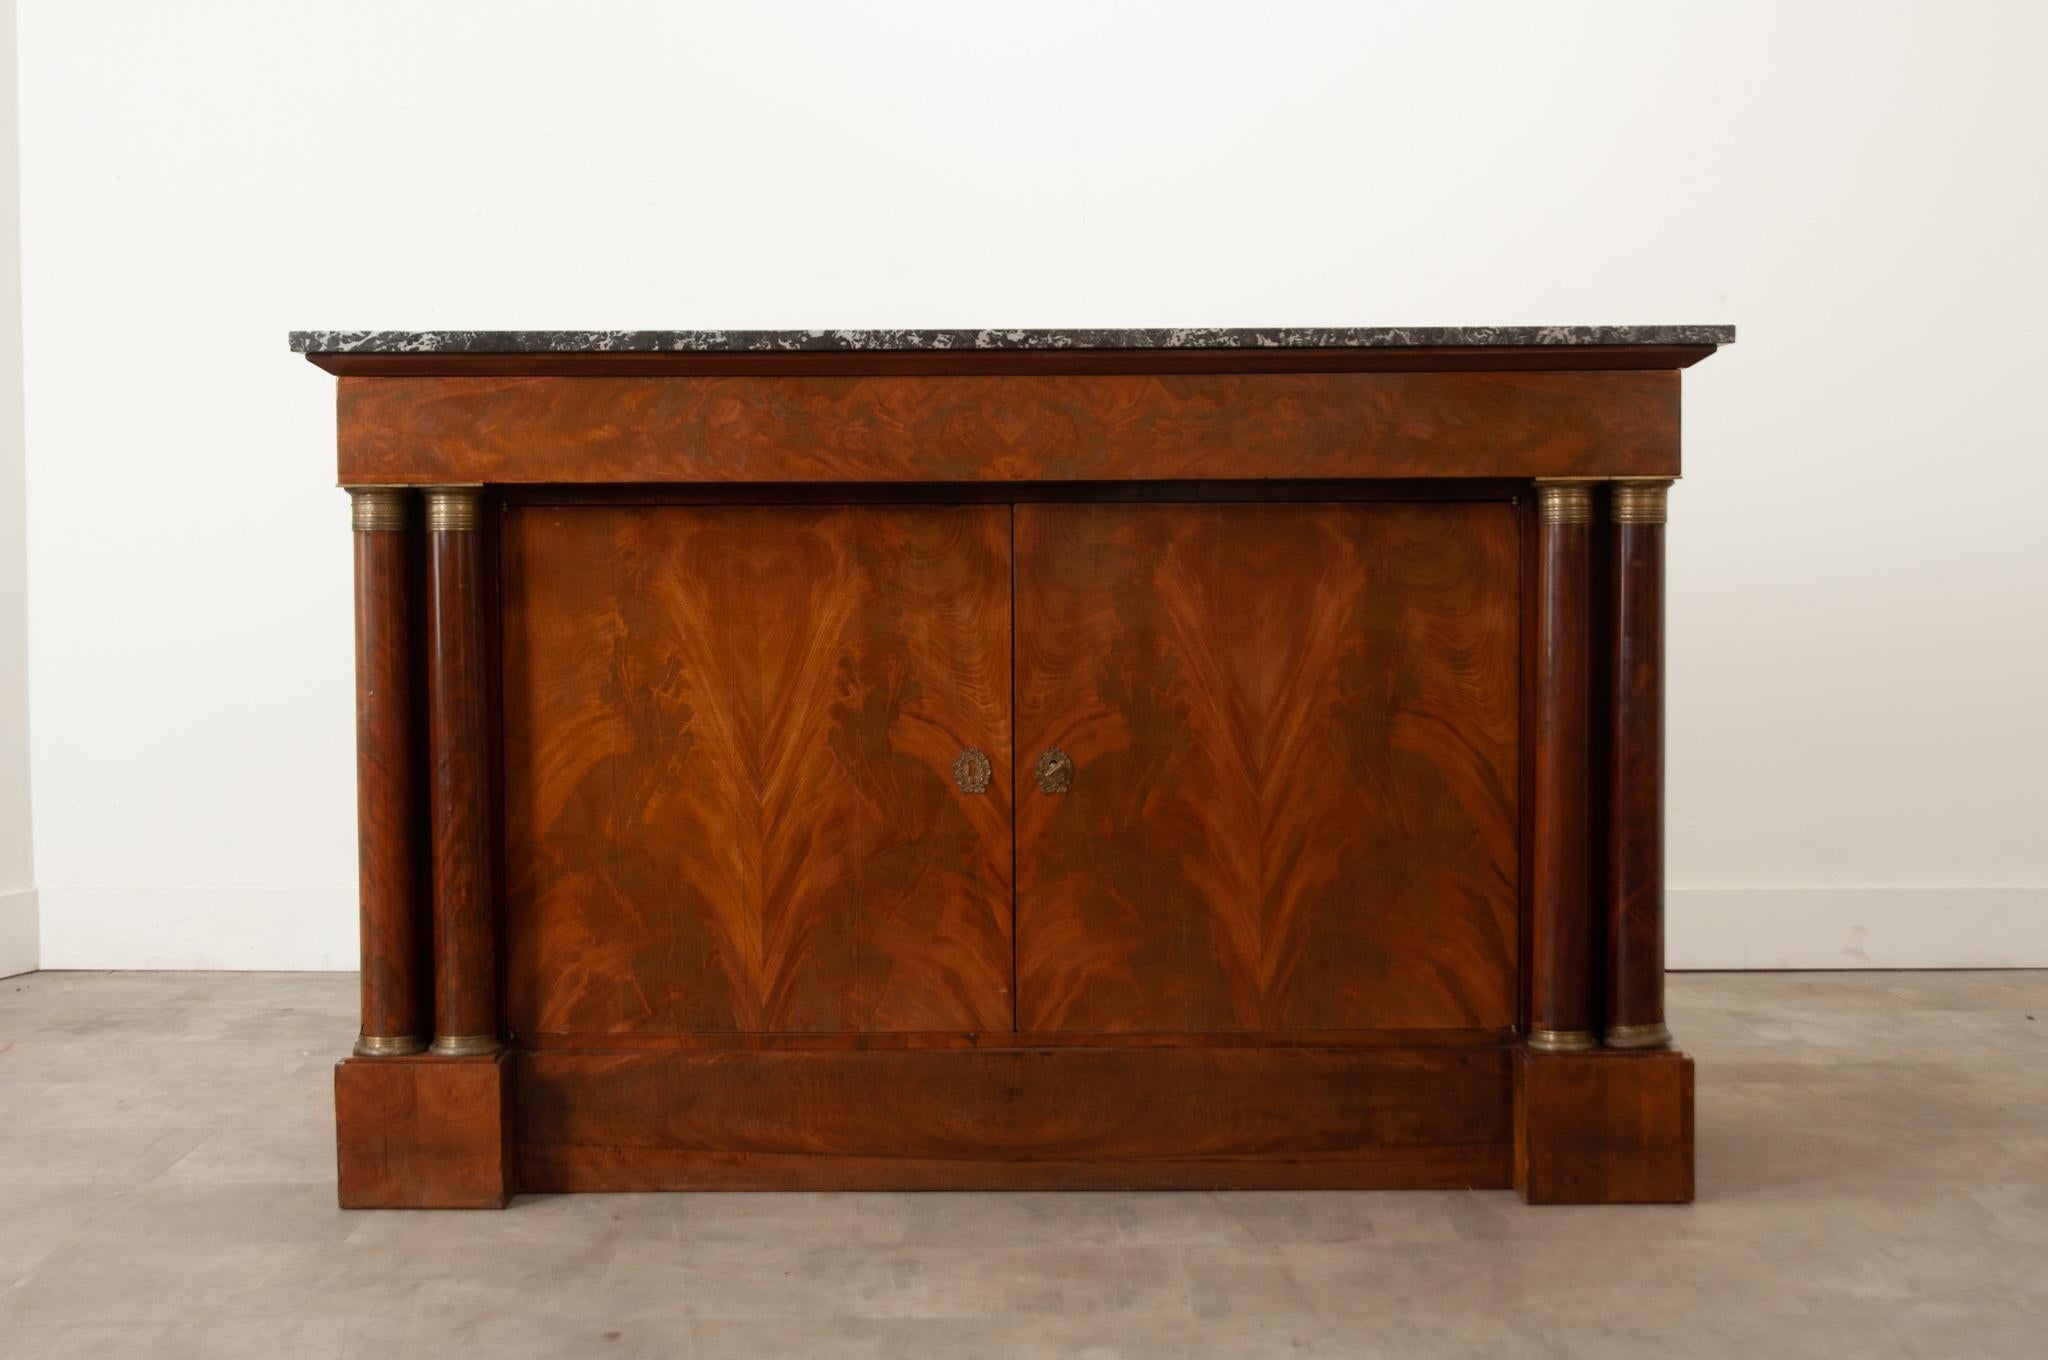 A French Empire buffet made of rich flame bookmatched mahogany is classic in style. The original marble top of charcoal with white veining sits at the top of this buffet and is removable. Below is a single wide drawer decorated with a burl